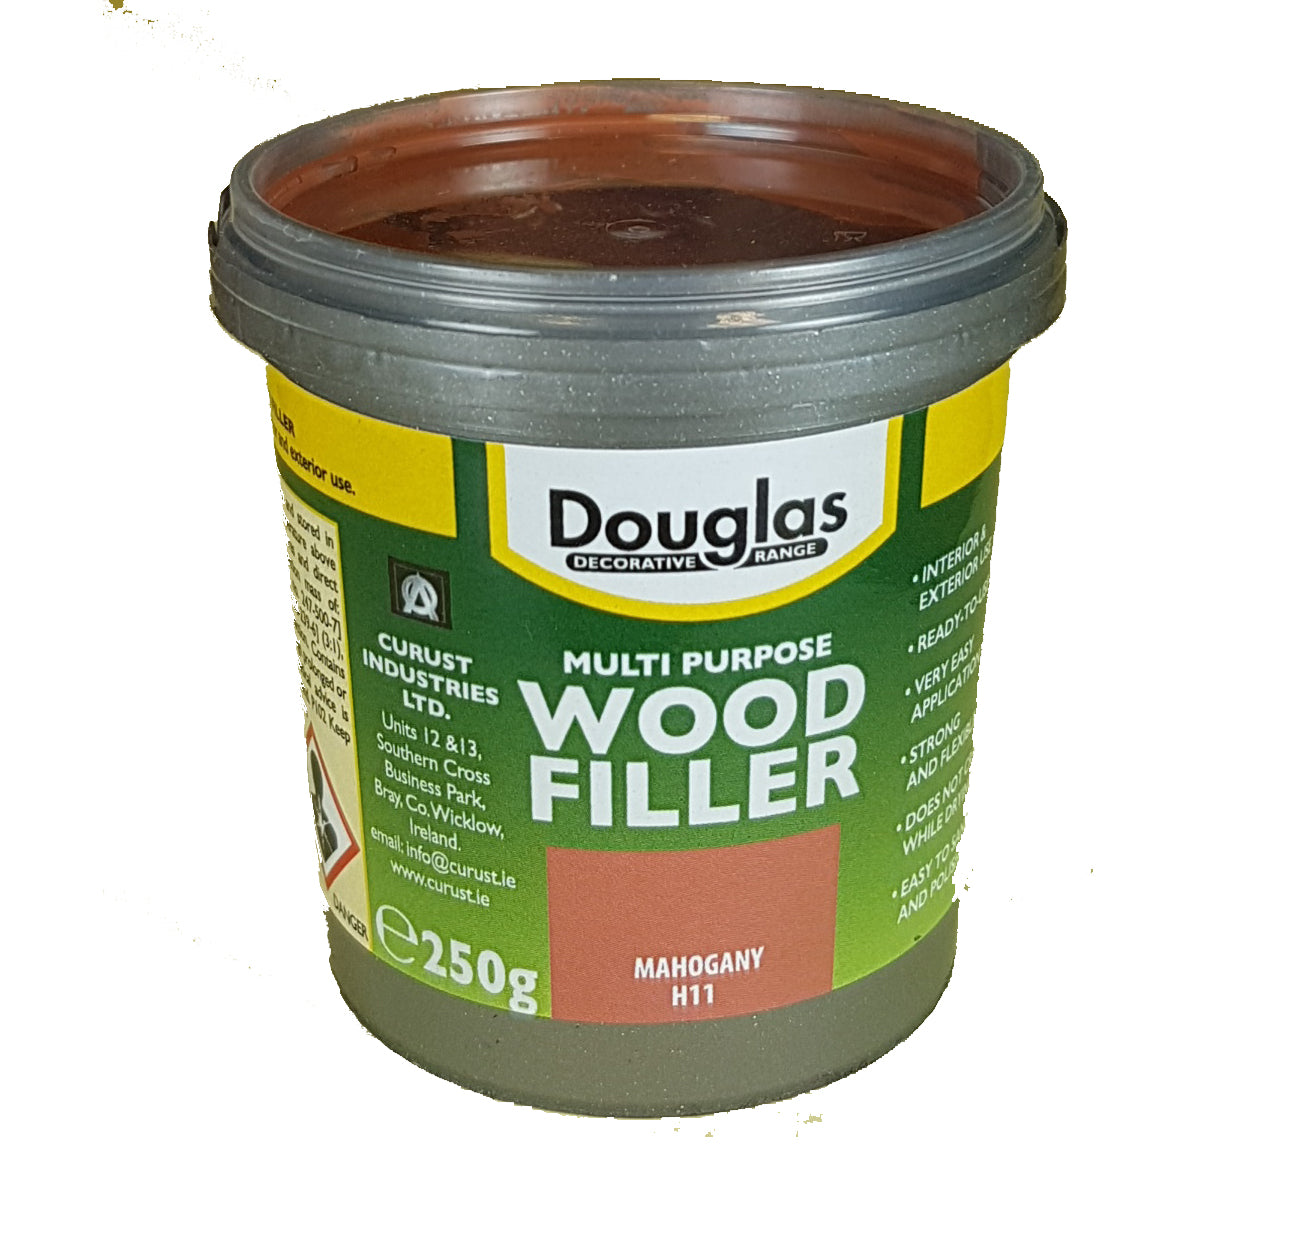 Paint & Decorating | Douglas Multi Purpose Wood Filler - Mahogany 250g by Weirs of Baggot St